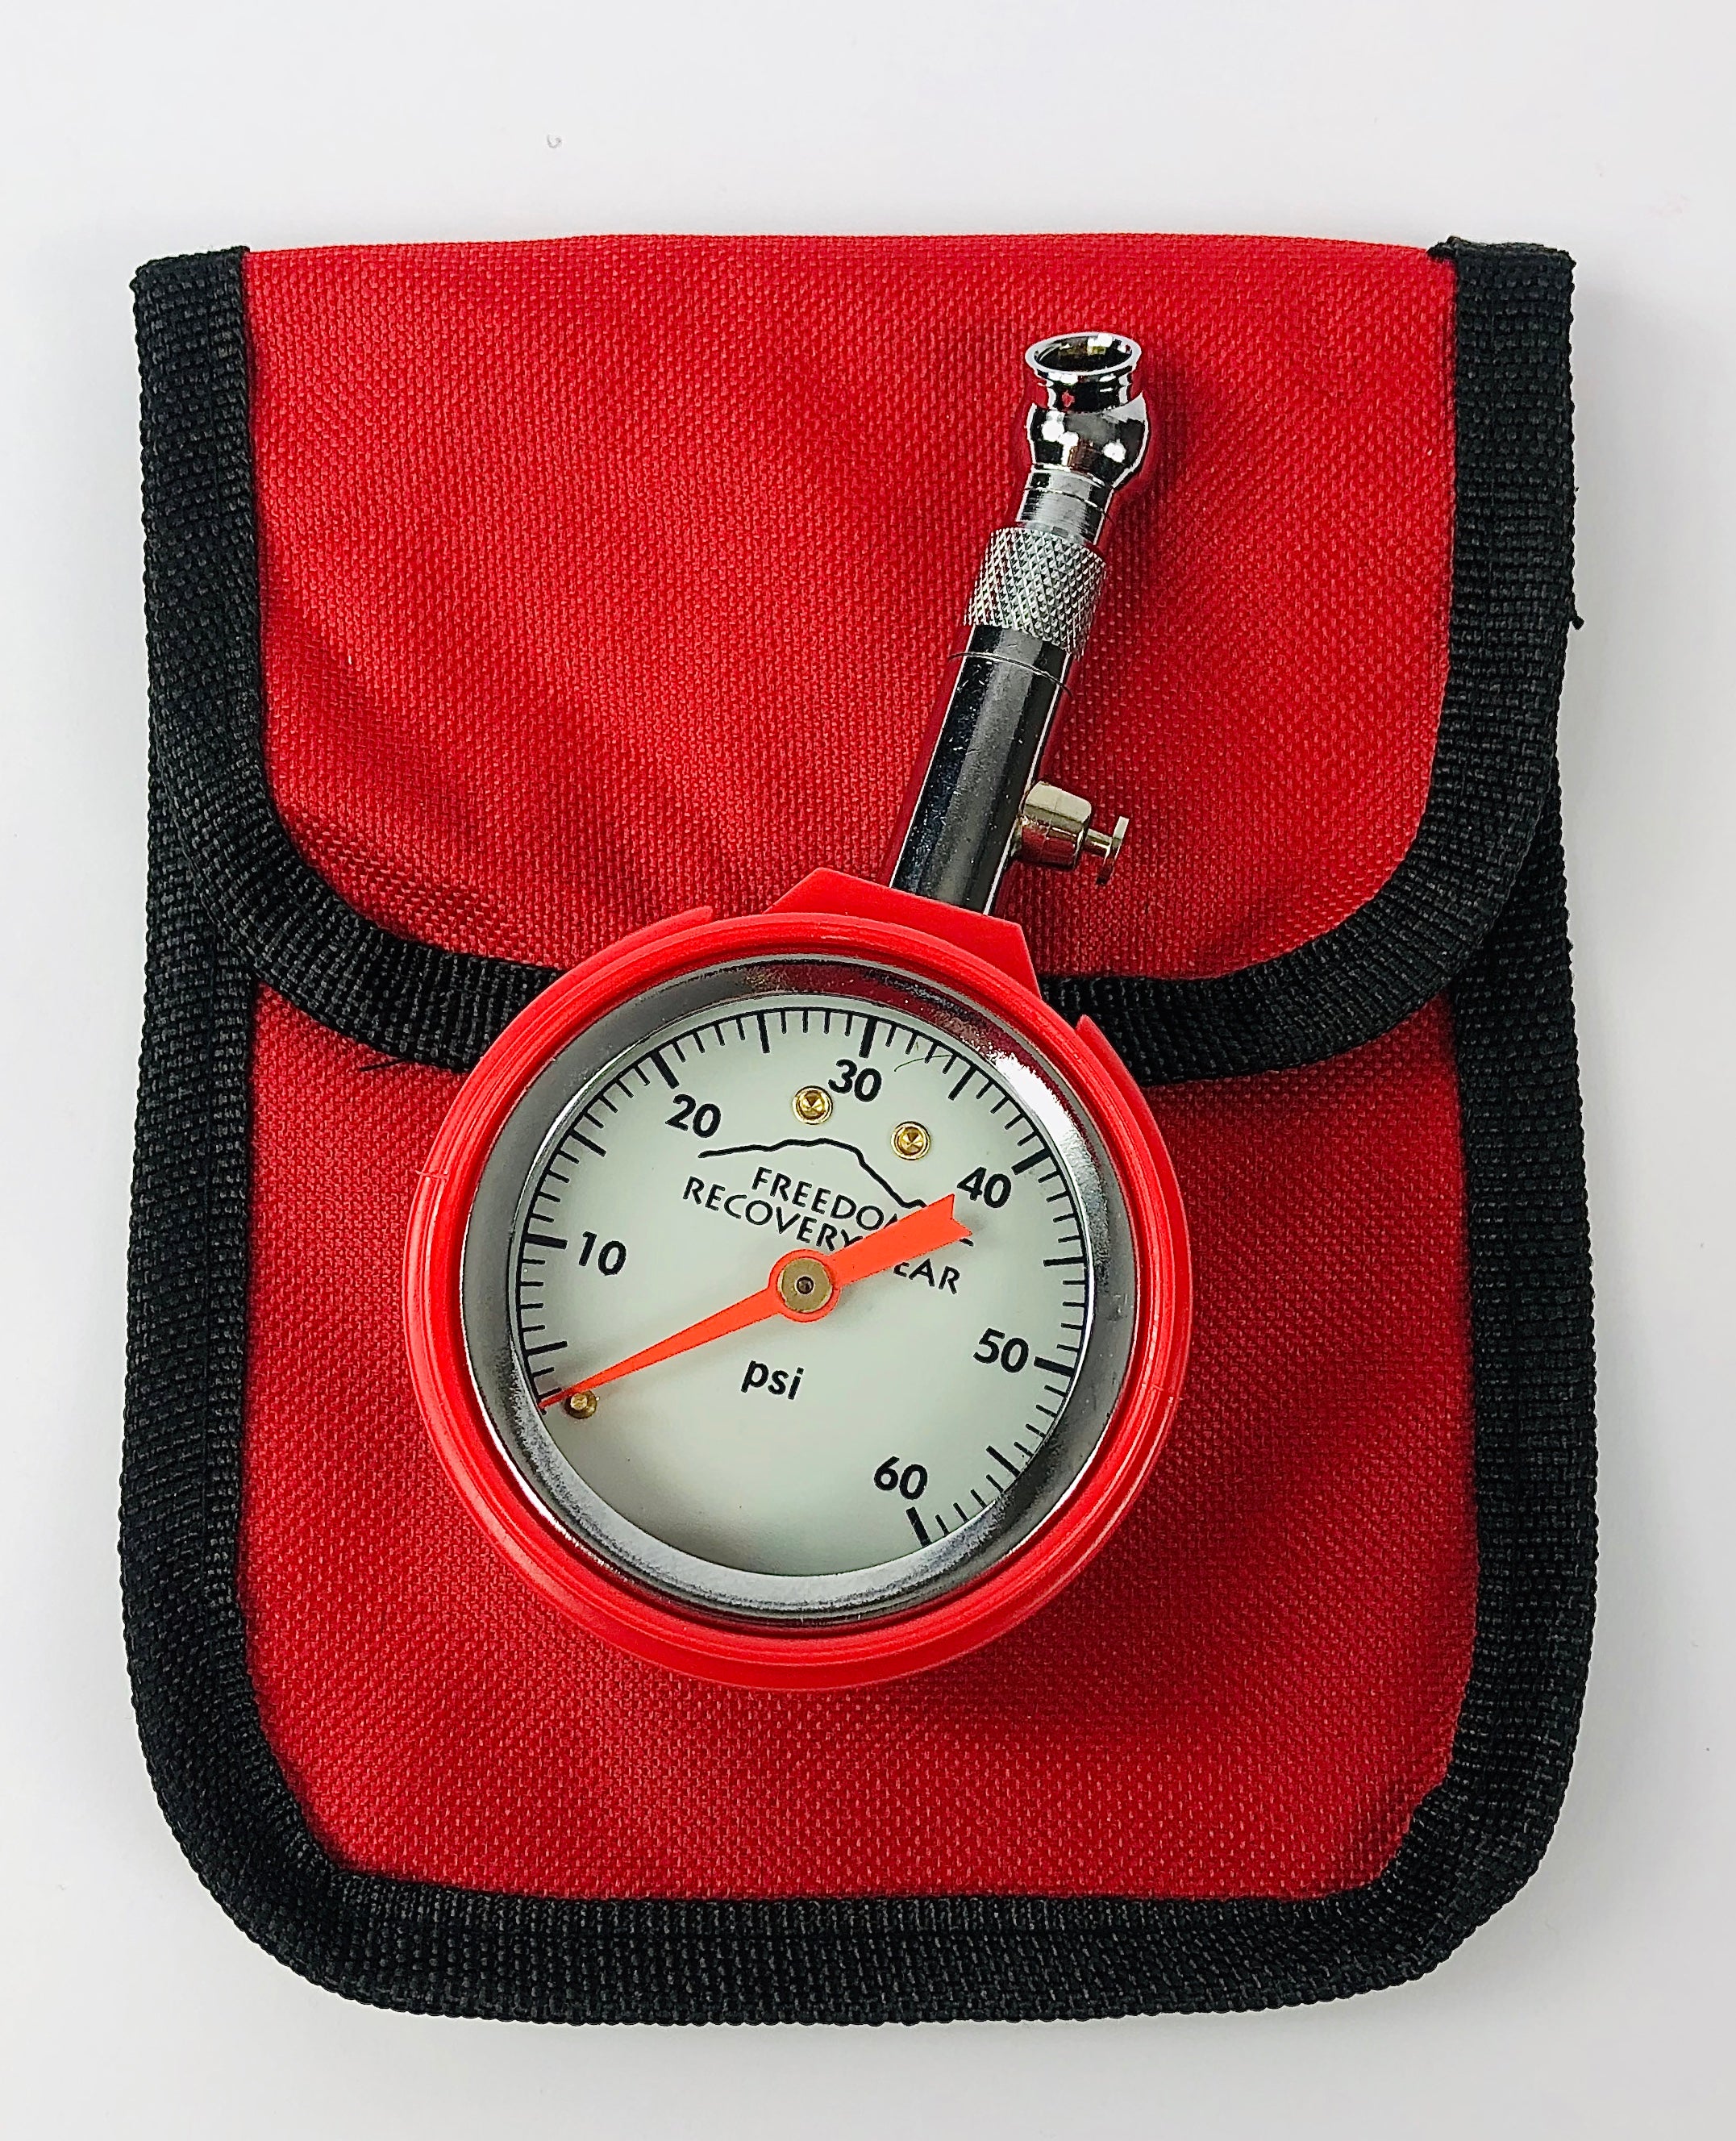 Freedom Recovery Gear Tire Pressure Gauge